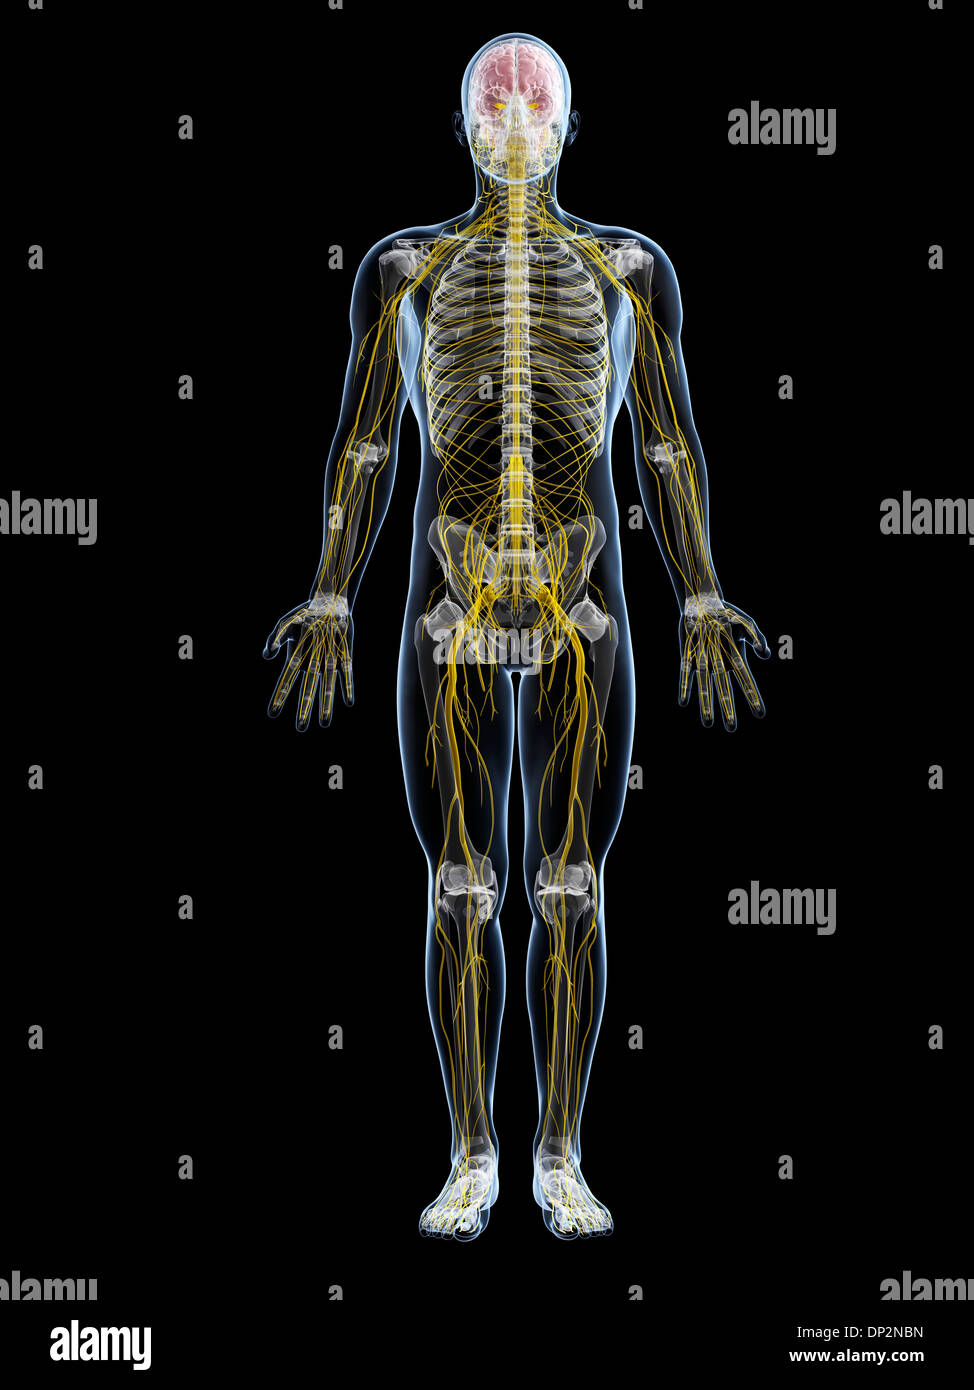 Full body view of a male figure of African ethnicity with the